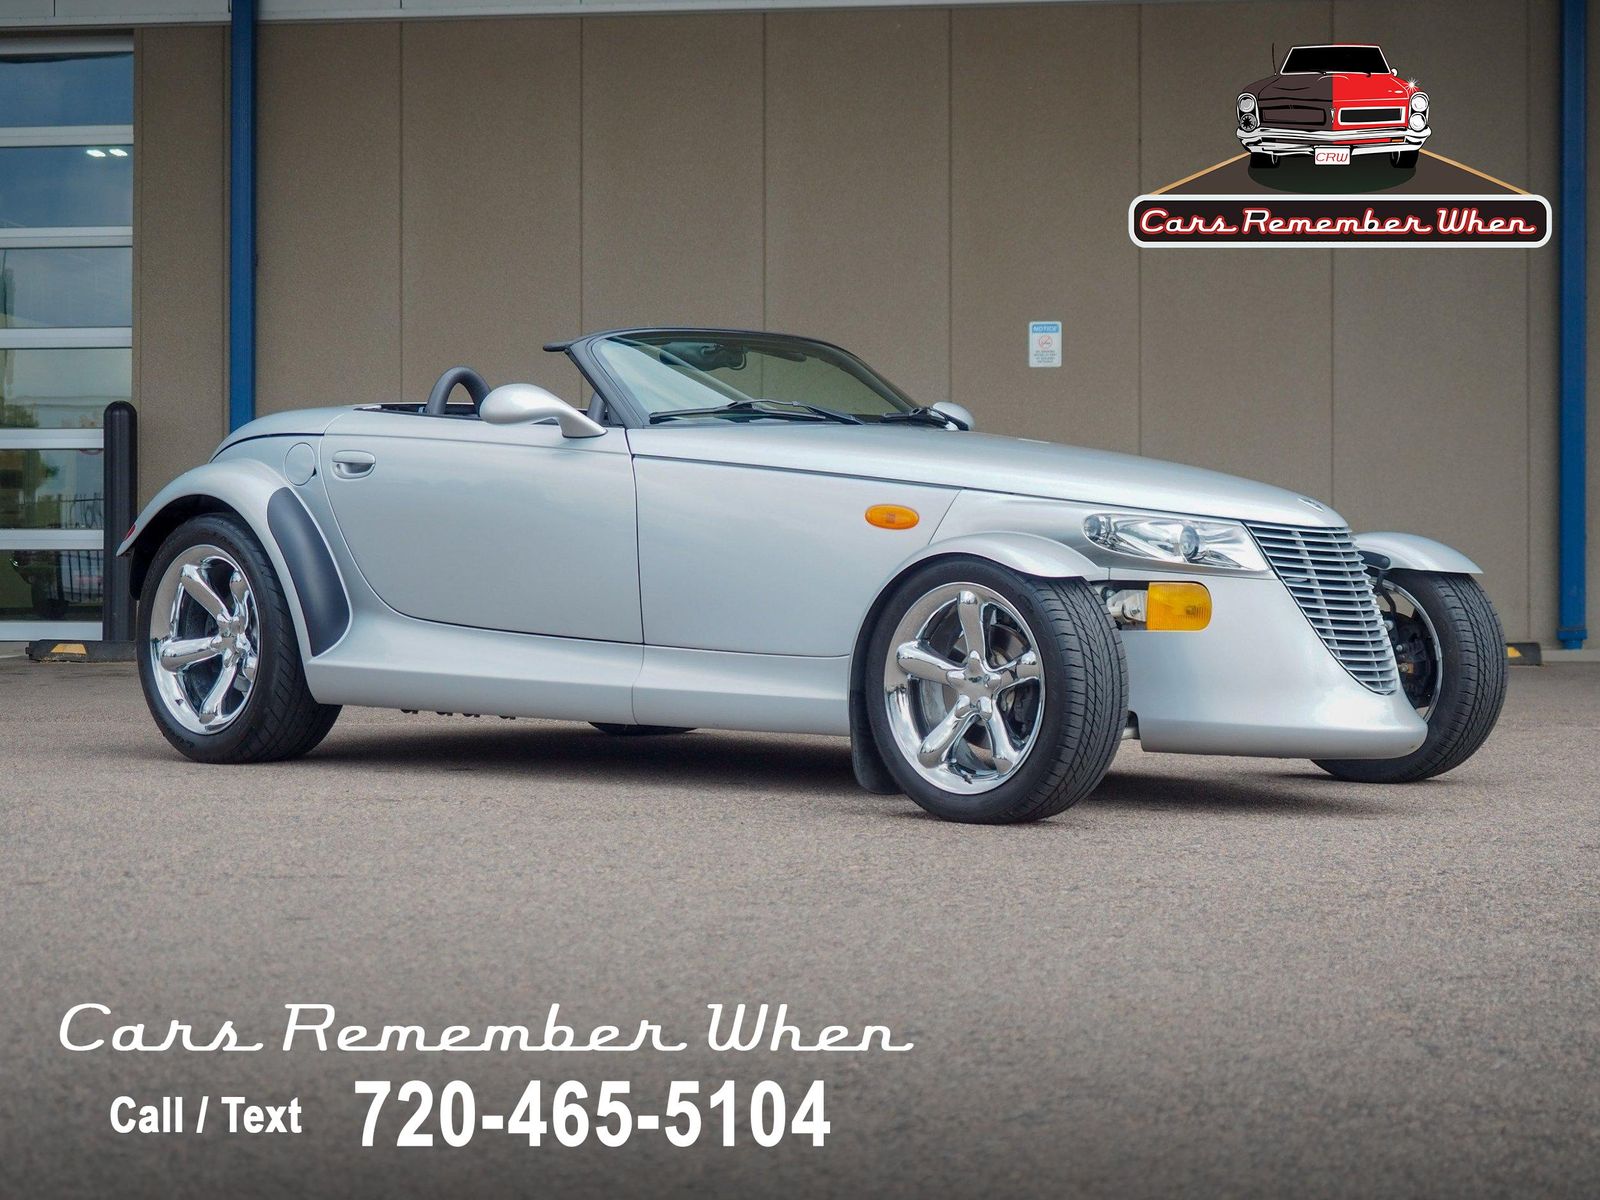 2000 Plymouth Prowler 1